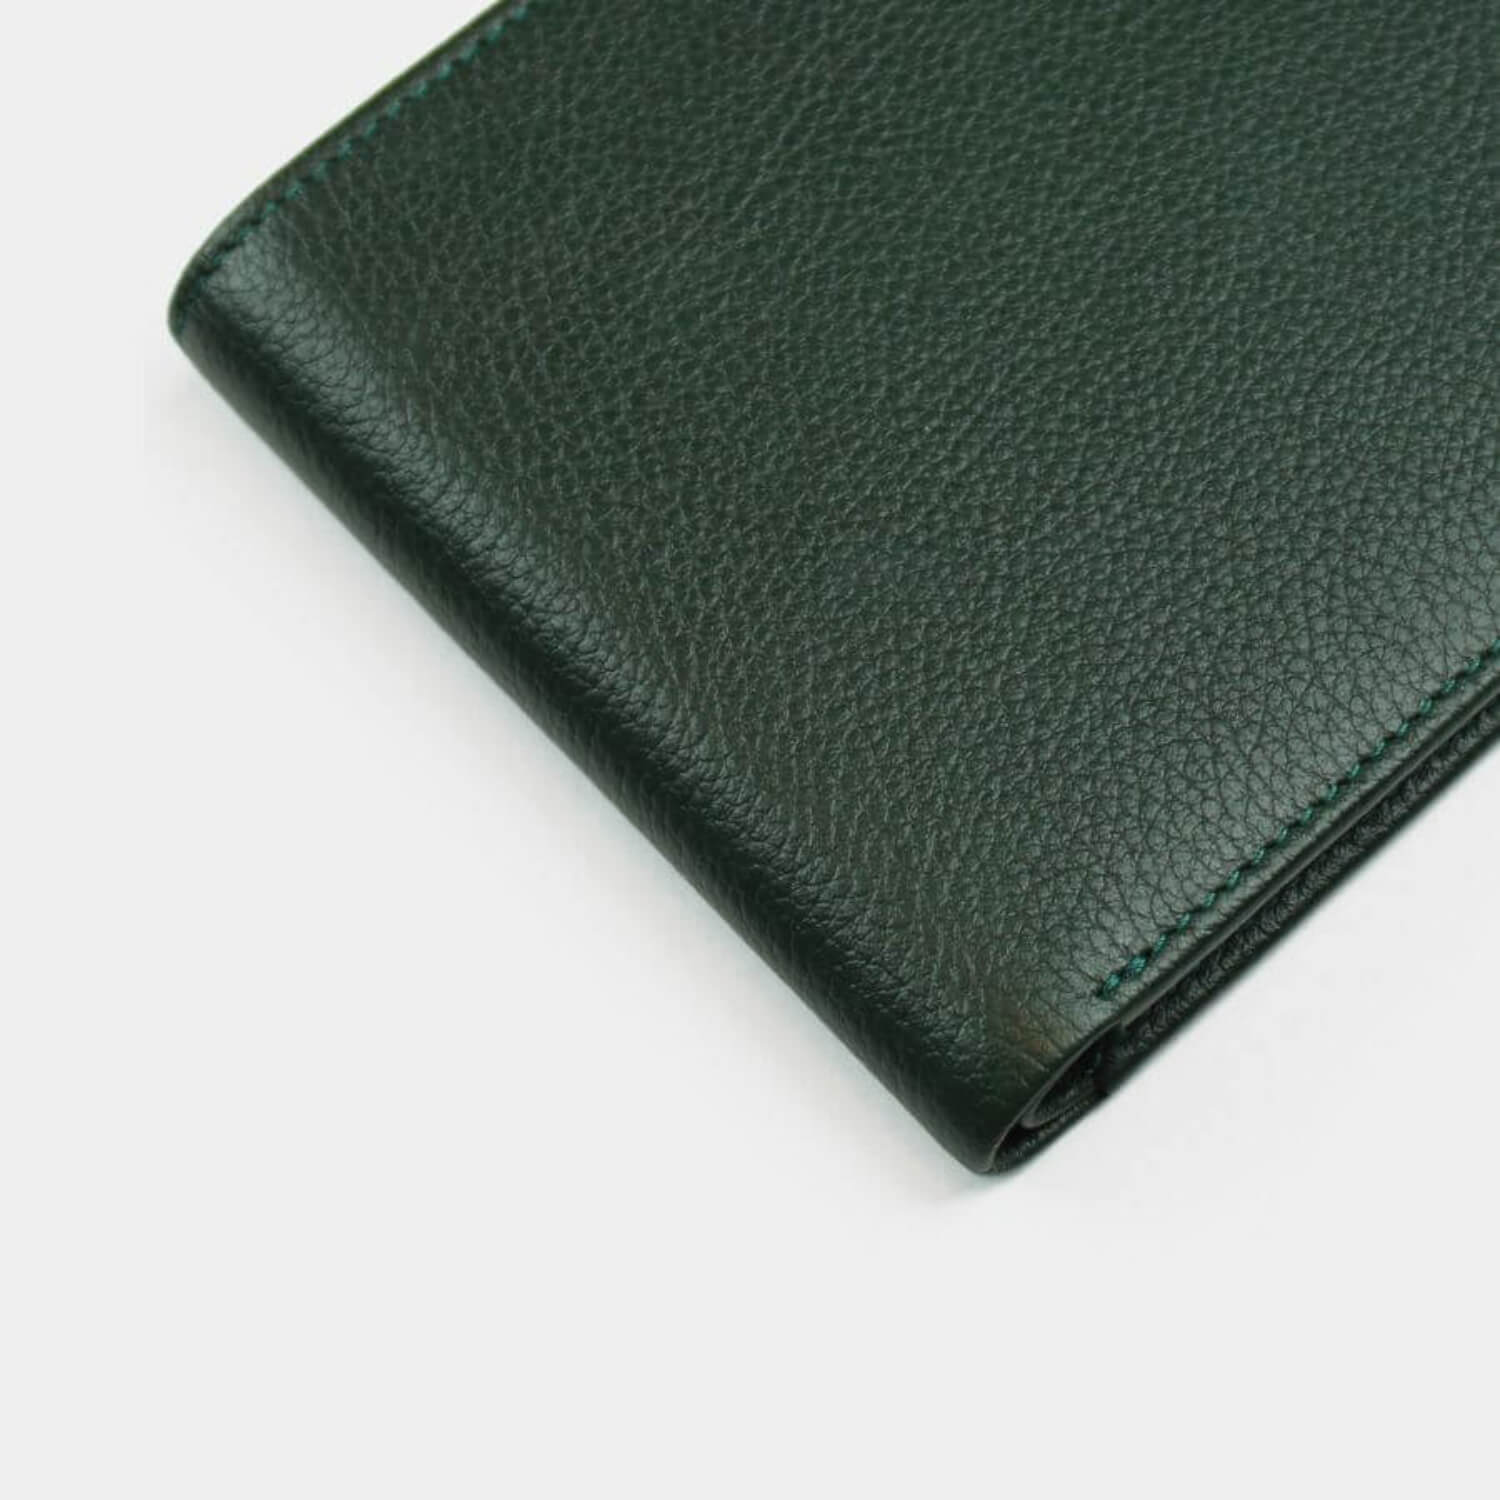 Fine grain leather wallet with 8 card slots and 2 note sections, branded with your company logo